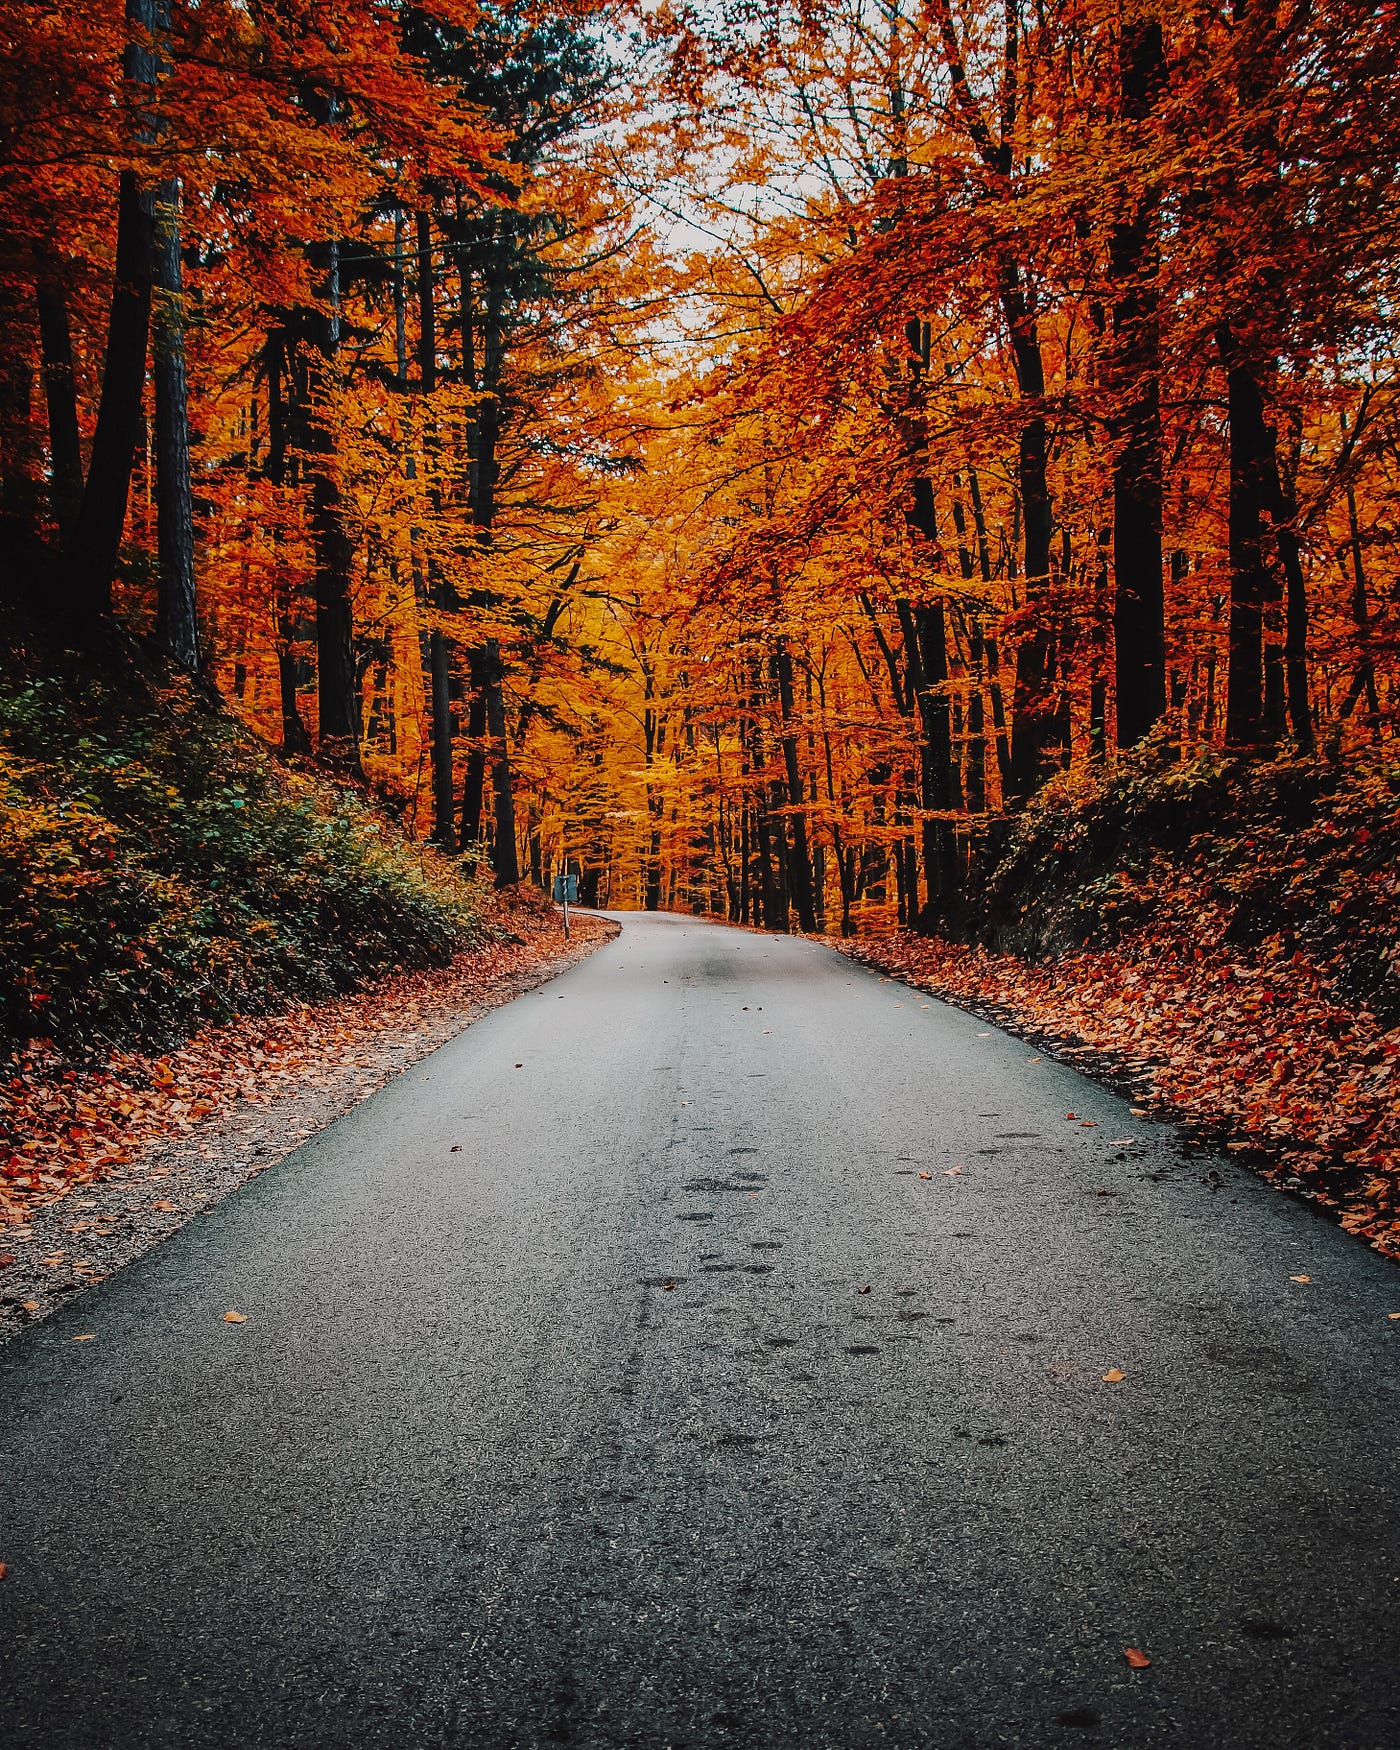 A quiet road leading through an autumnal forest full of oranges and reds